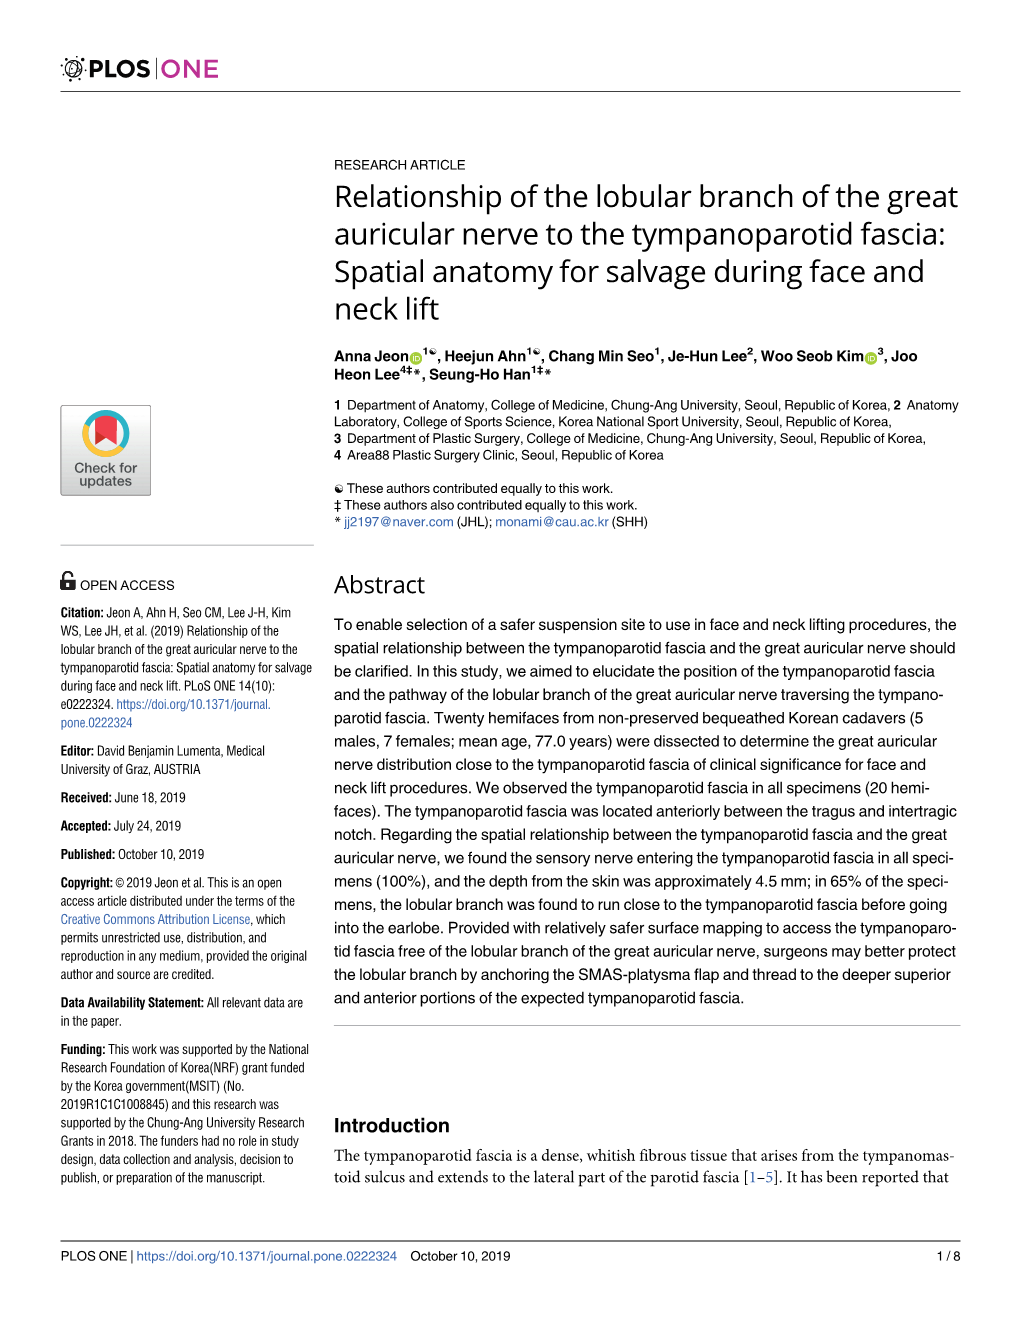 Relationship of the Lobular Branch of the Great Auricular Nerve to the Tympanoparotid Fascia: Spatial Anatomy for Salvage During Face and Neck Lift